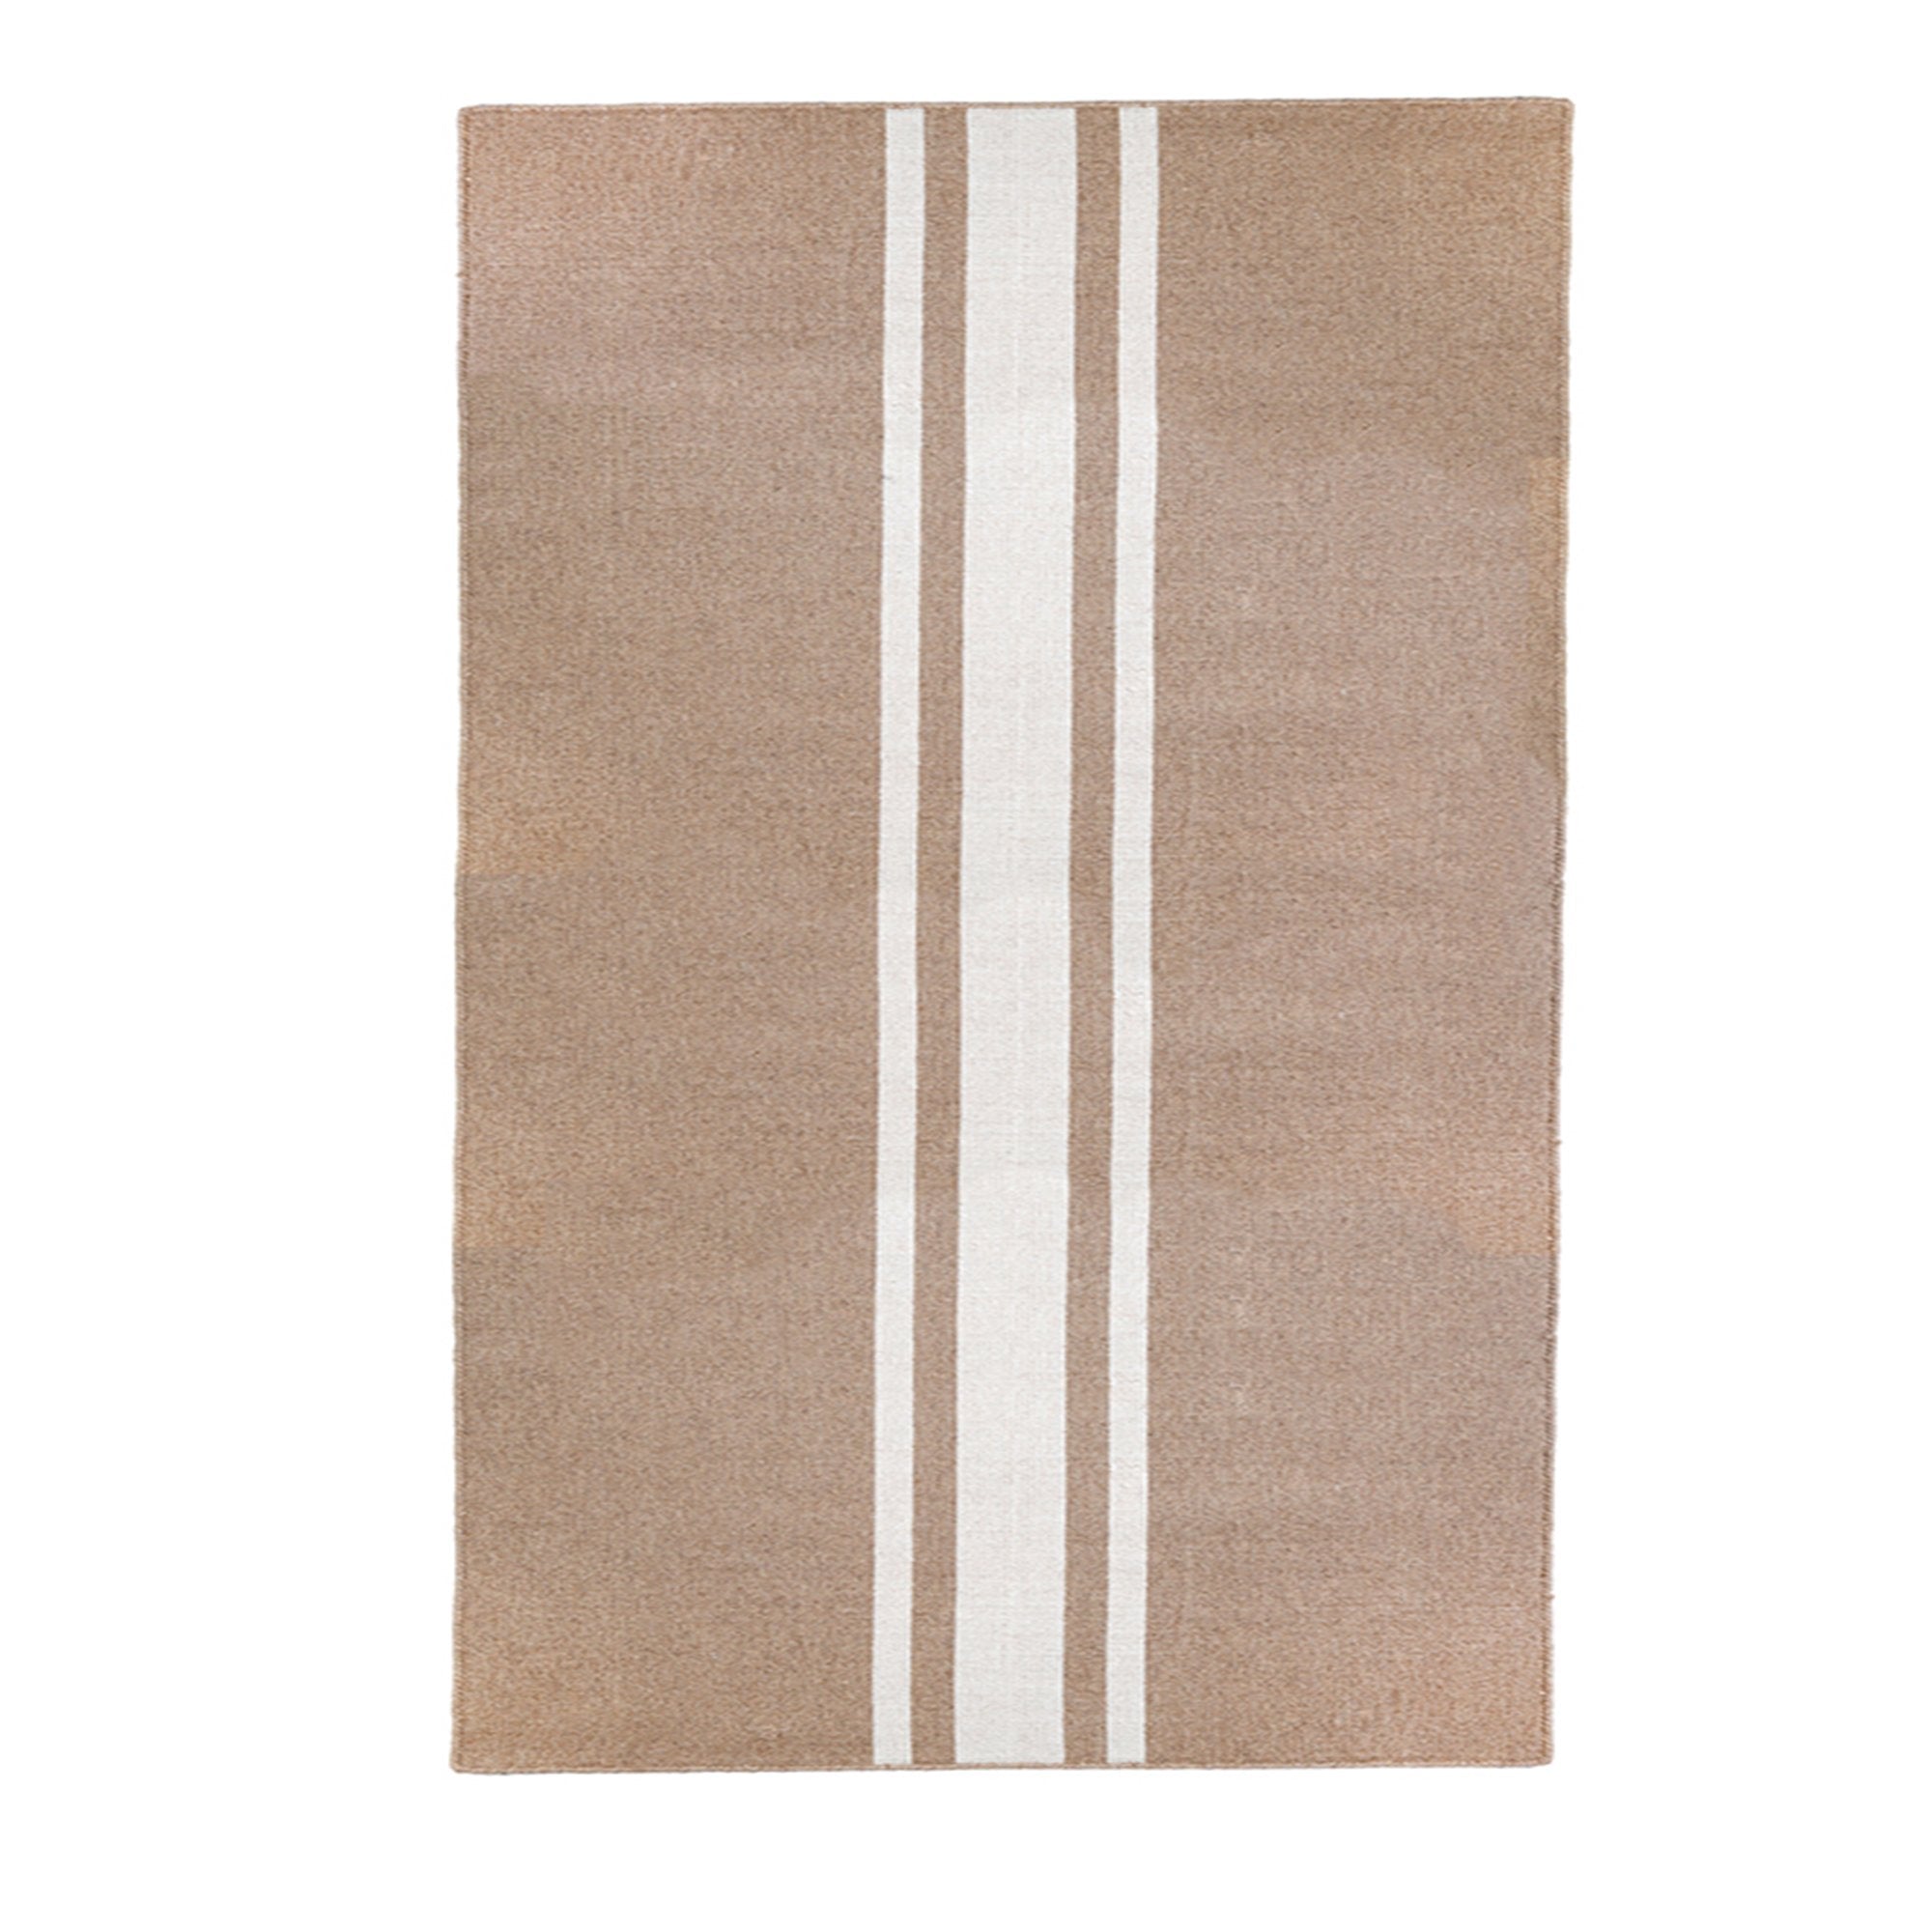 Handwoven Wool/Jute Rug- Natural with Ivory Stripe